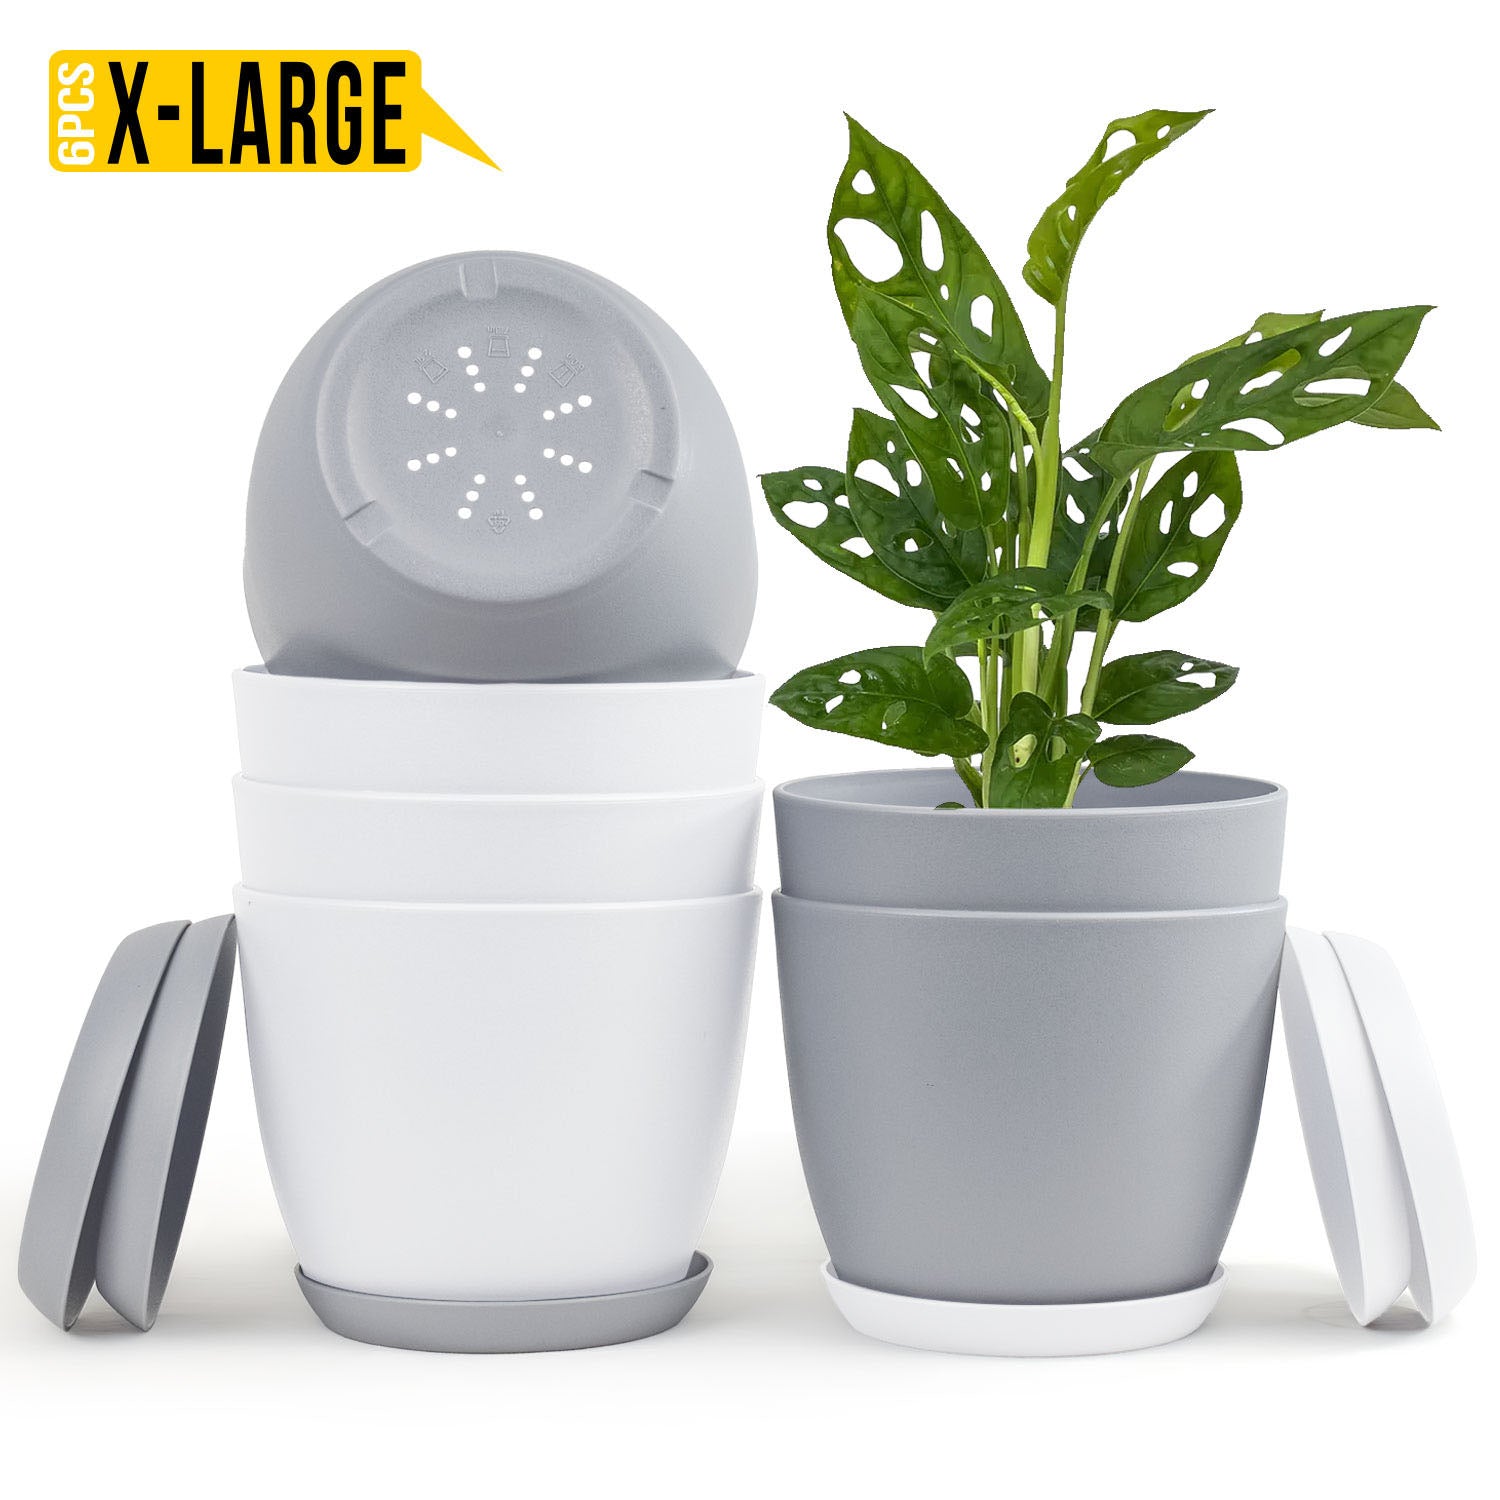 Revitalize Your Space with Fast Forward Extra Large Plant Pots: Two Vibrant Colors, Drainage, Ideal for Indoor Planters - Explore Multi-Packs for Plastic Planters, Cactus, and Succulents Decor Fast Forward